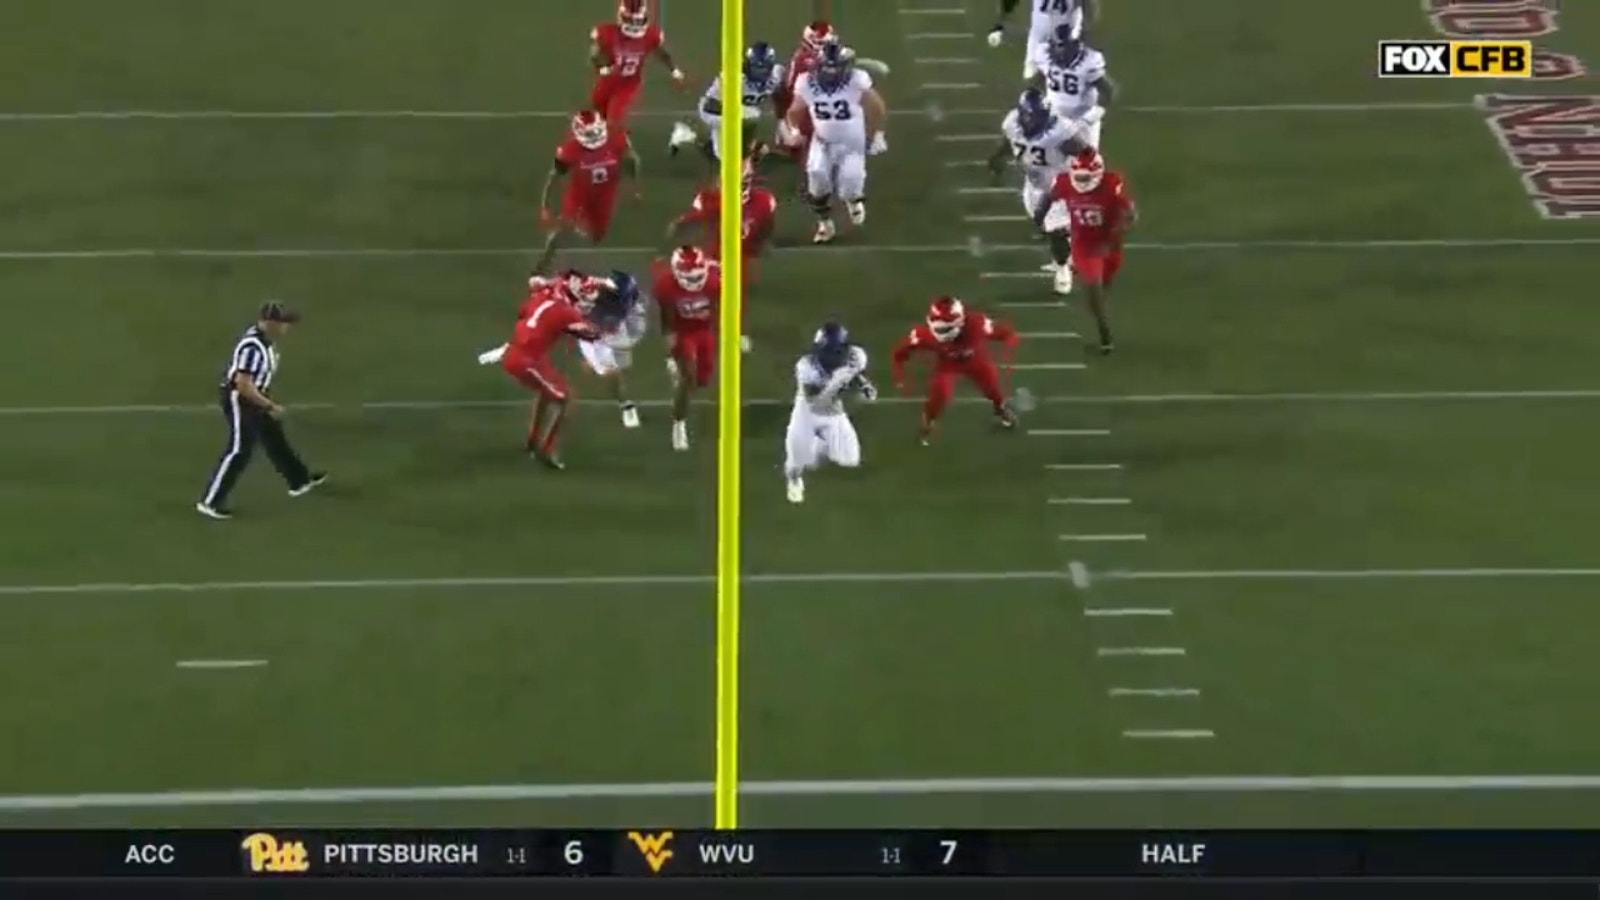 Emani Bailey JUKES his way past Houston for a 16-yard rushing TD